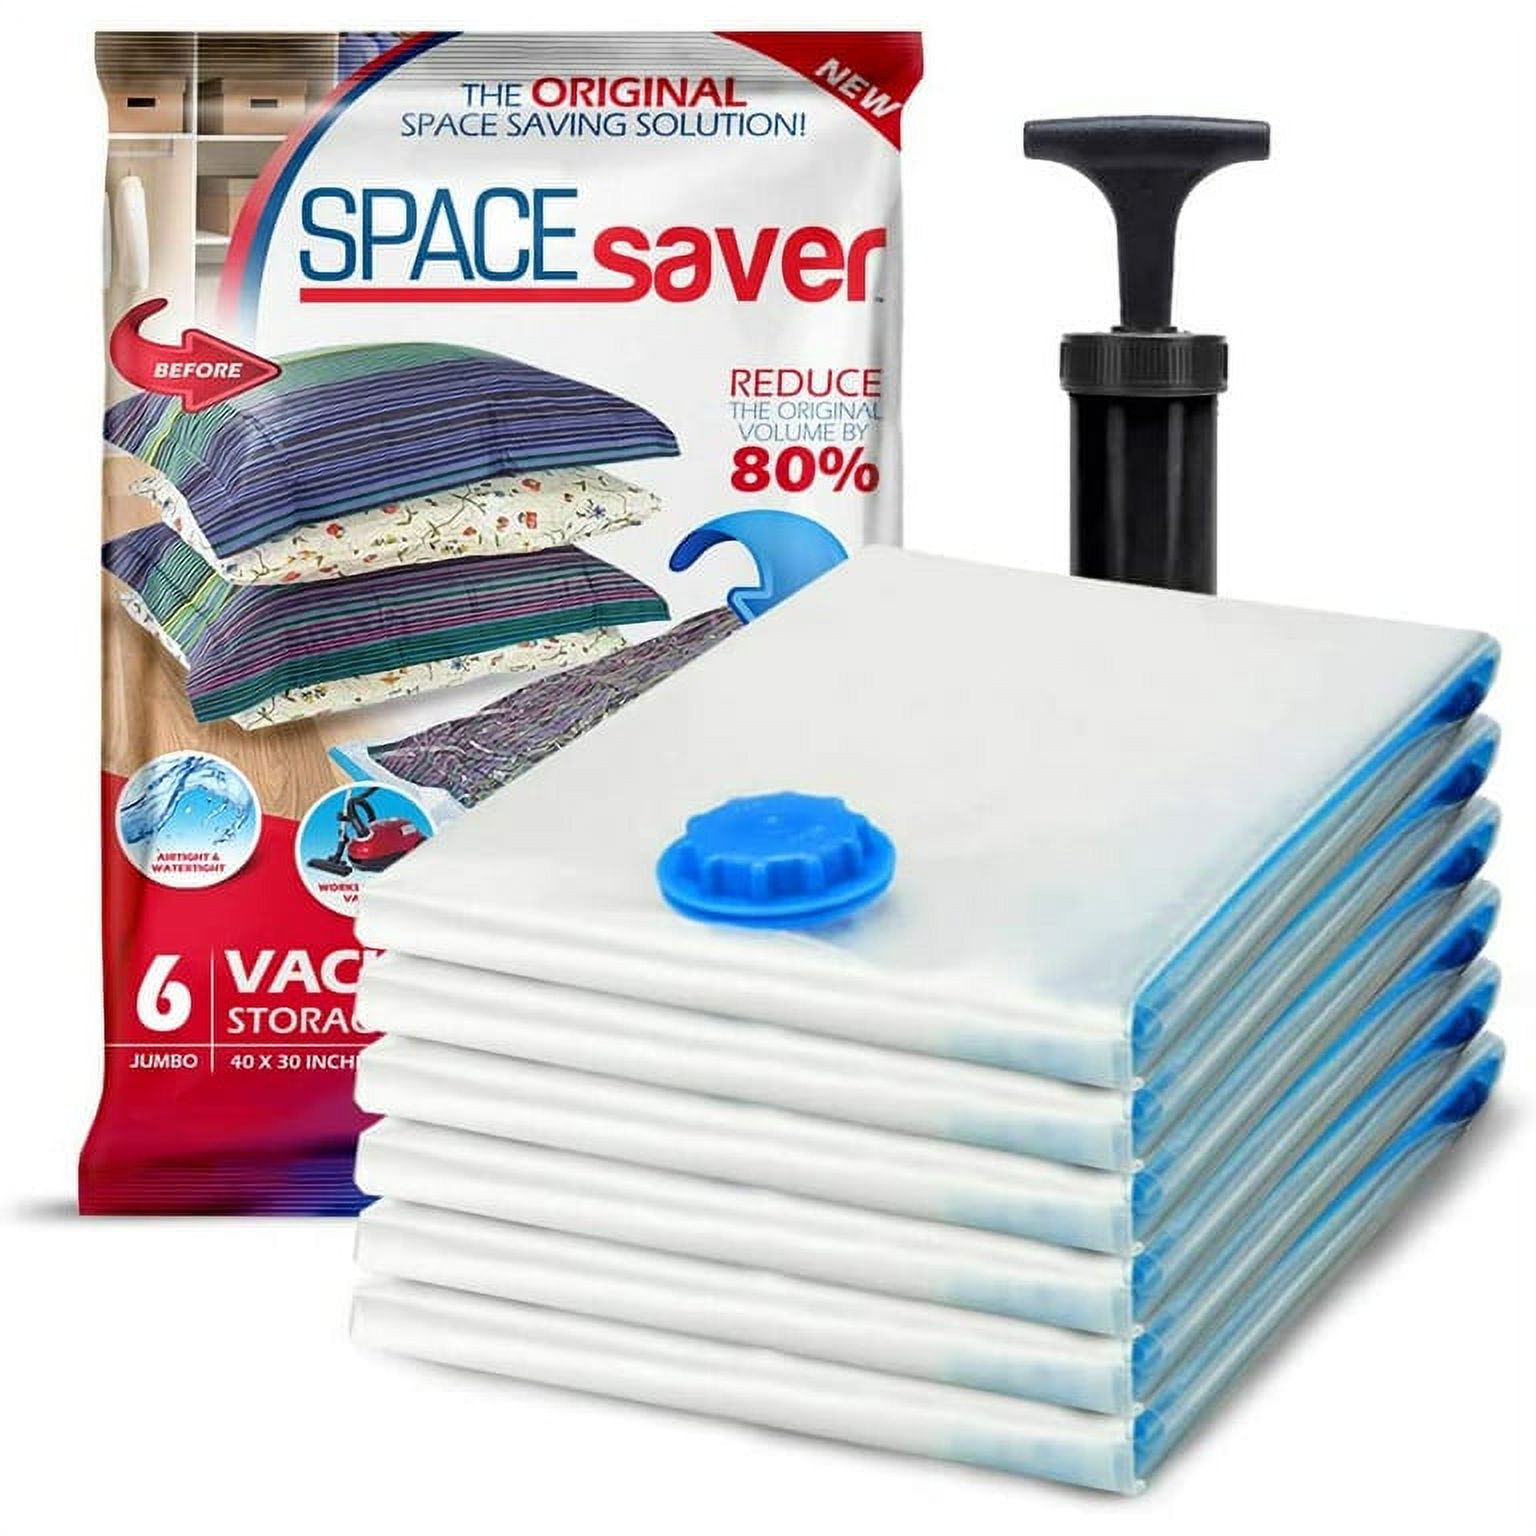 Spacesaver Premium *Jumbo* Vacuum Storage Bags (Works with Any Vacuum Cleaner + Free Hand-Pump for Travel!) Double-Zip Seal and Triple Seal Turbo-Valve for 80% More Compression! - image 1 of 6